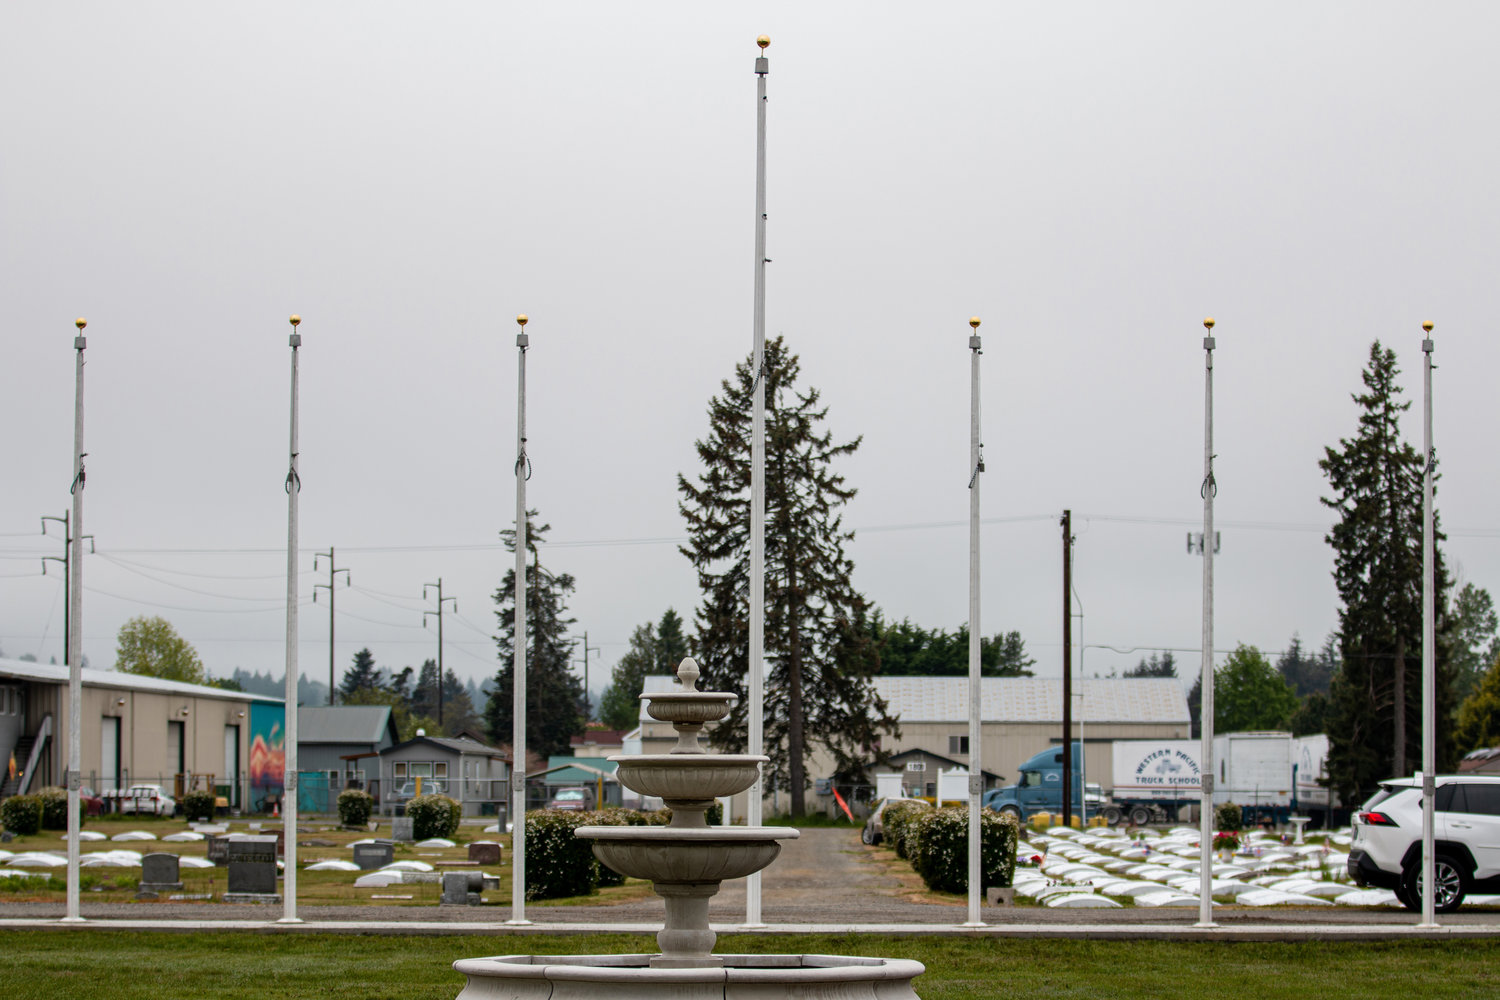 Newly erected flag poles as well as a large fountain sit at the center of the Greenwood Memorial Park.